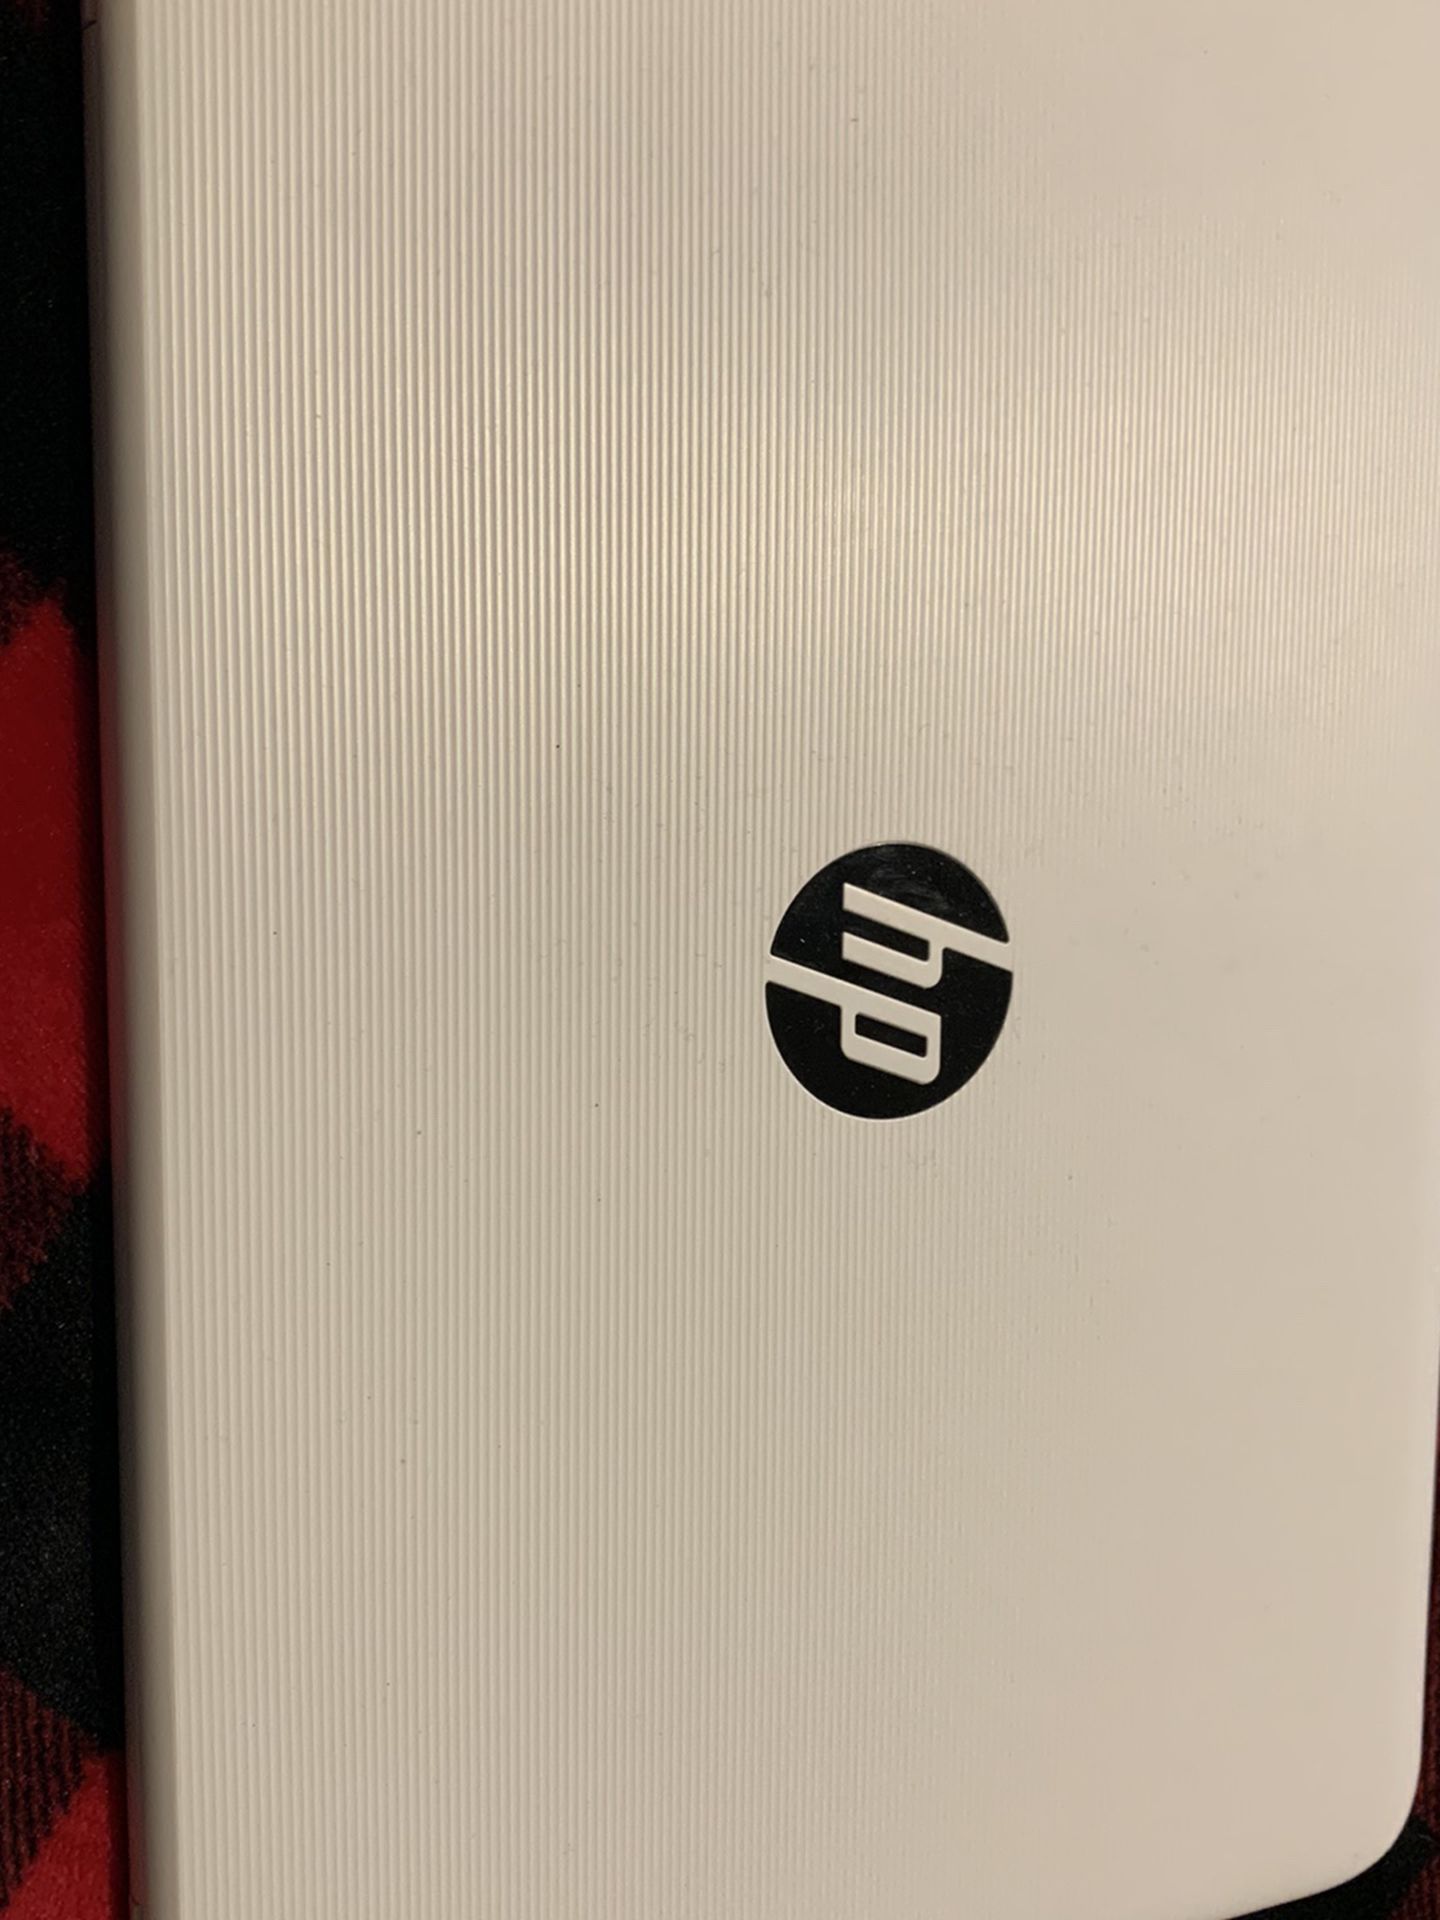 HP STREAM 14" White 4GB Comes With Charger/no Scratches